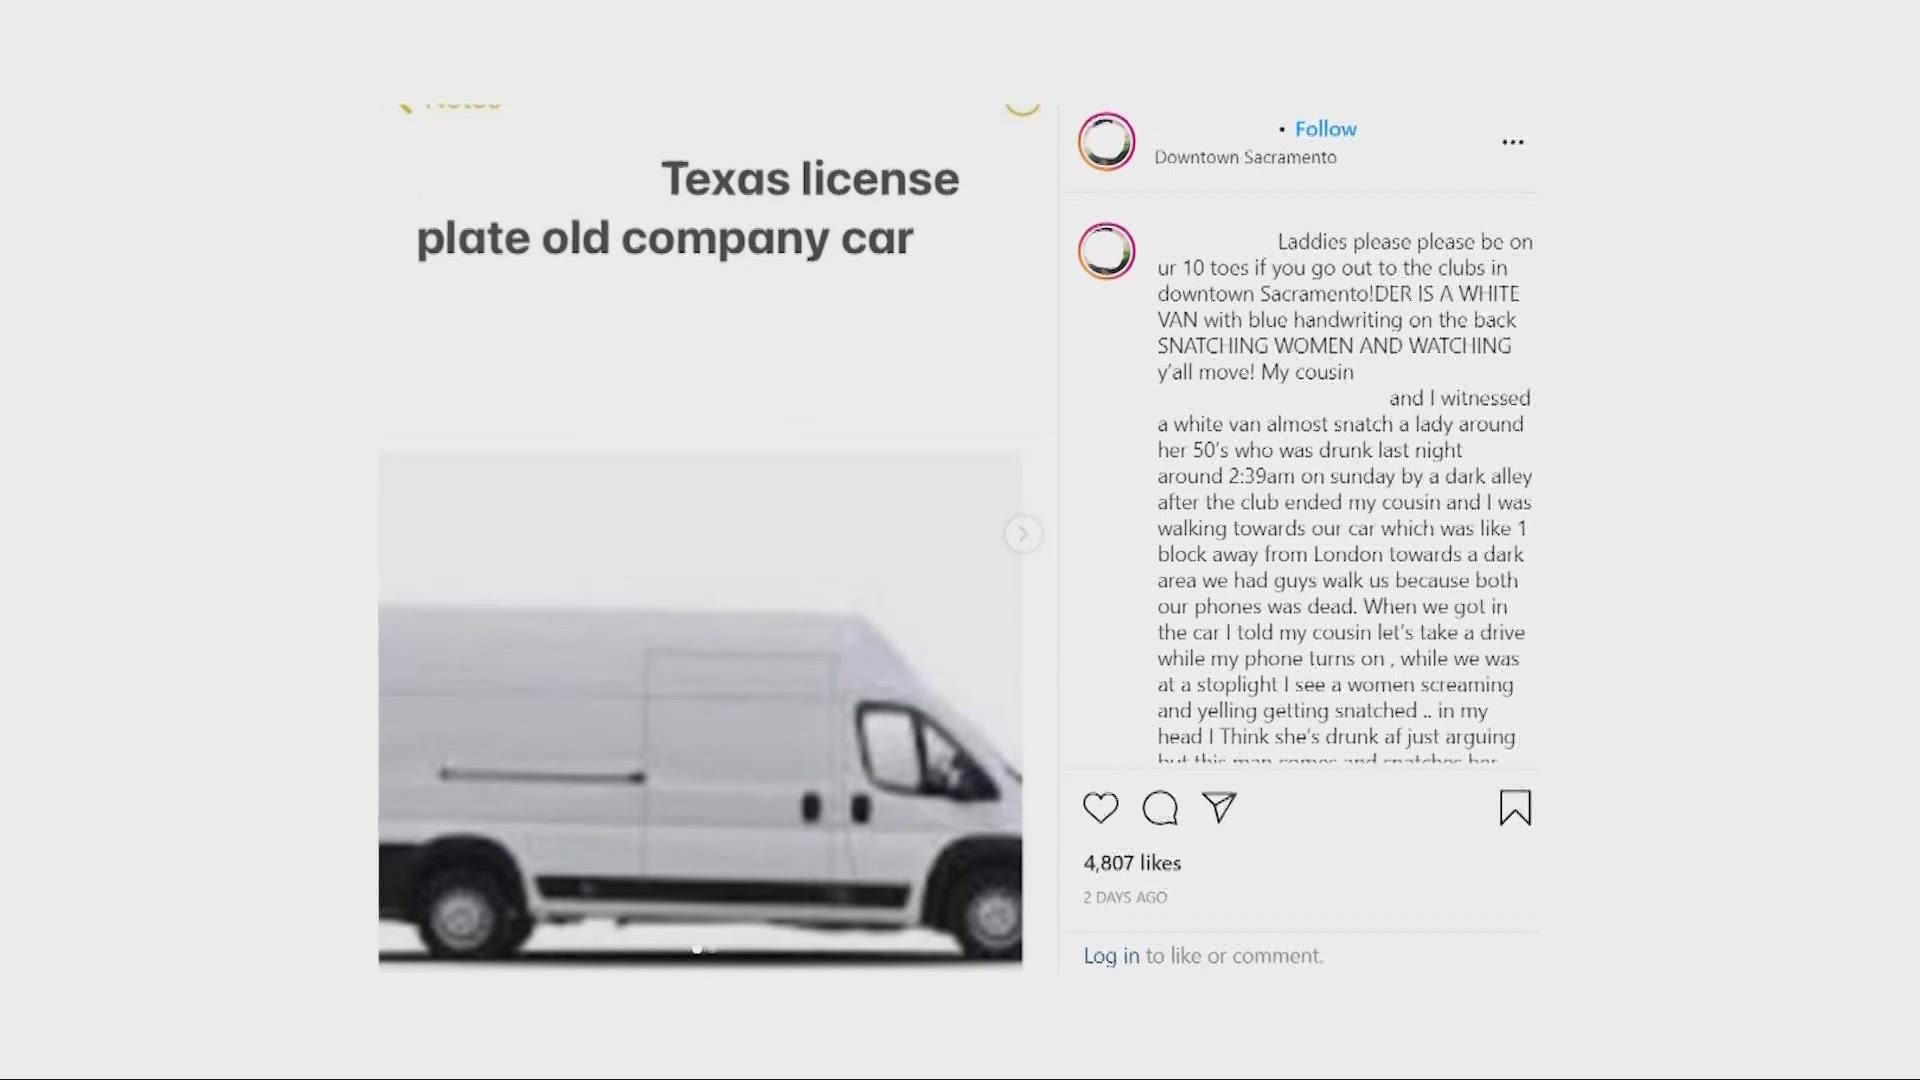 Sacramento Police Department said they're investigating a complaint about a suspicious vehicle related to a social media post.